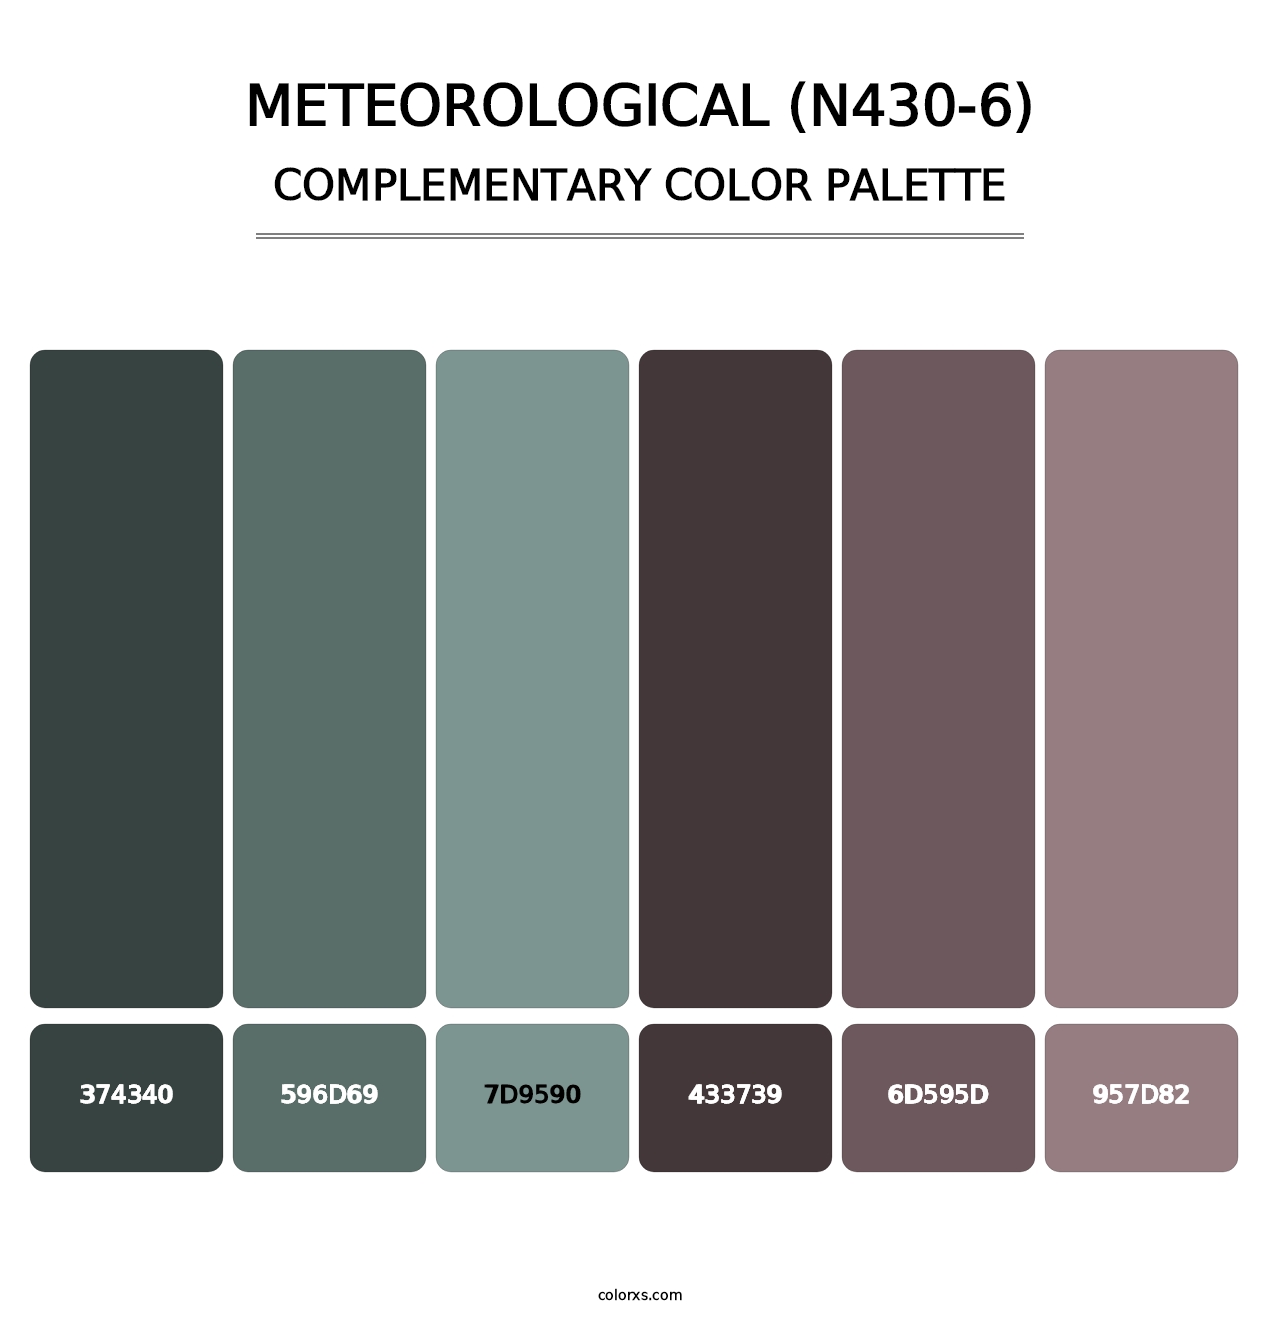 Meteorological (N430-6) - Complementary Color Palette